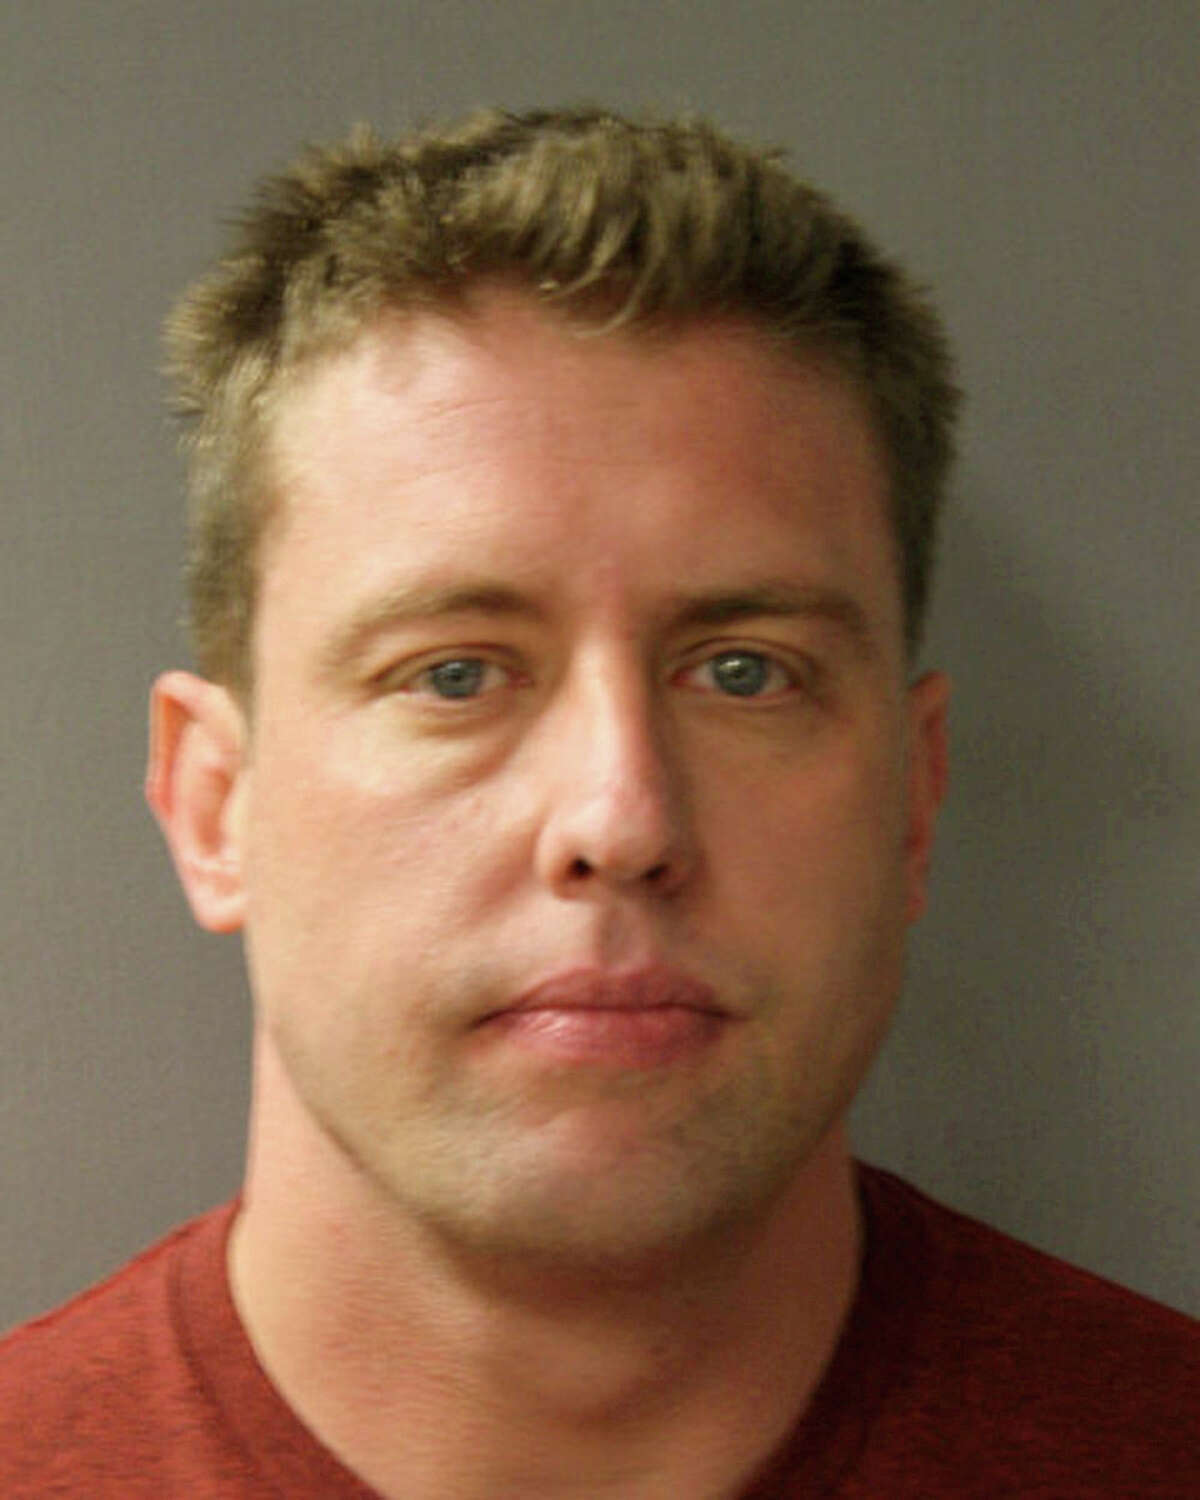 In a photo provided by law enforcement, Jason Stockley, a former St. Louis police officer, who fatally shot Anthony Lamar Smith while on duty. Stockley was acquitted of first-degree murder on Sept. 15, 2017, a verdict that had been tensely awaited in a city at the center of the national debate over police tactics and race relations. (Harris County Sheriff's Office via The New York Times)